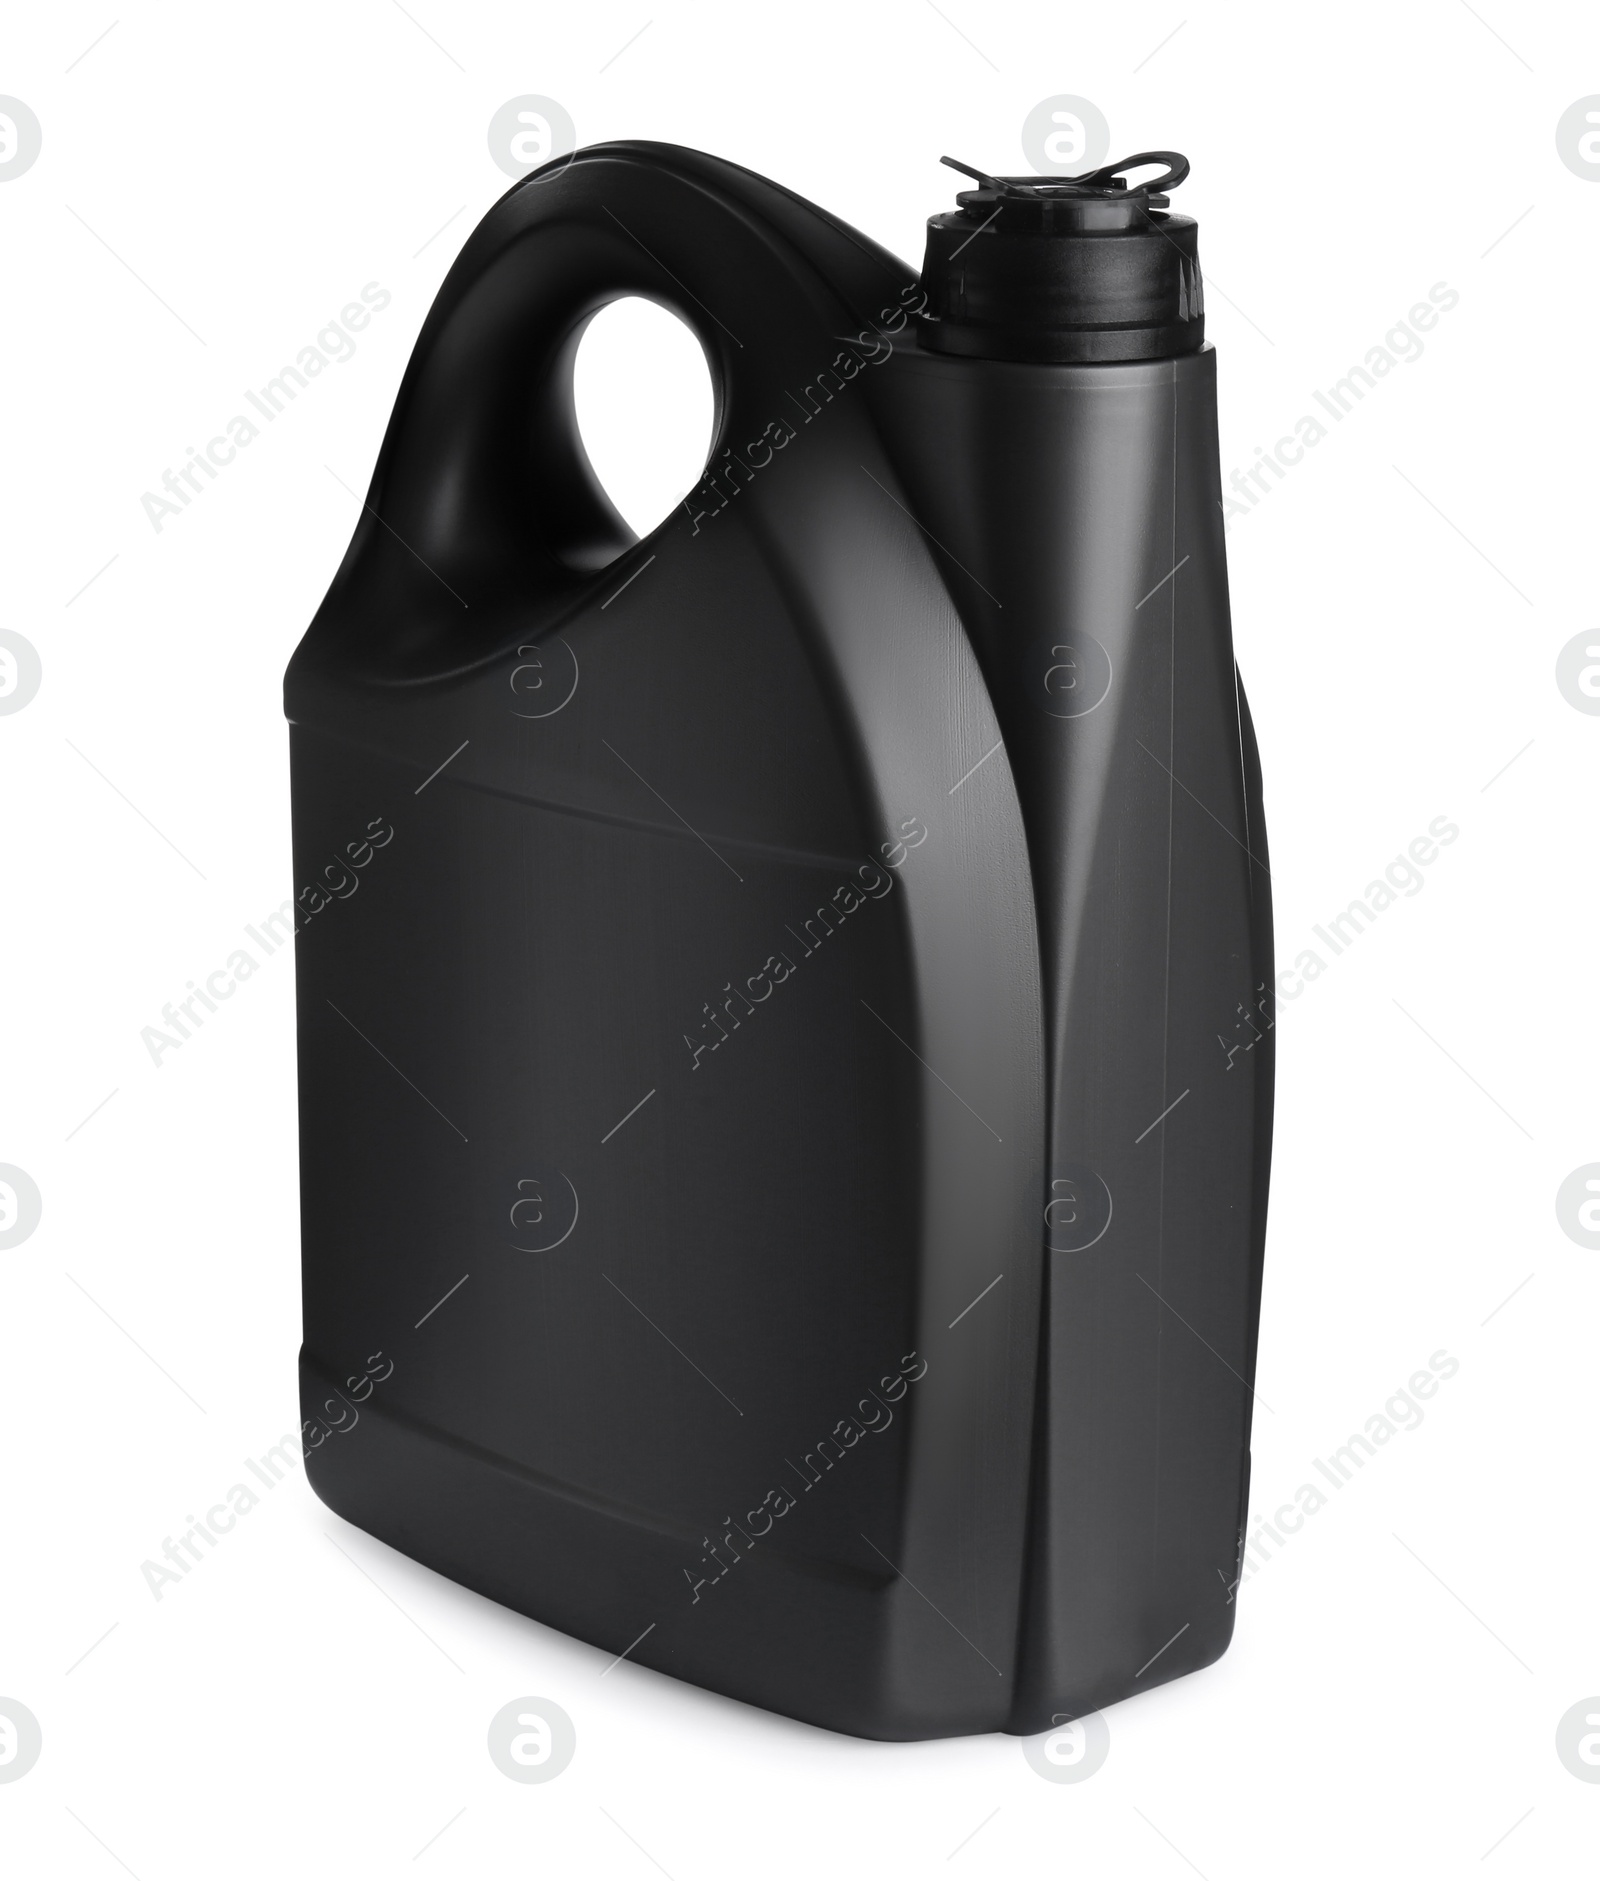 Photo of Blank black canister of car product isolated on white